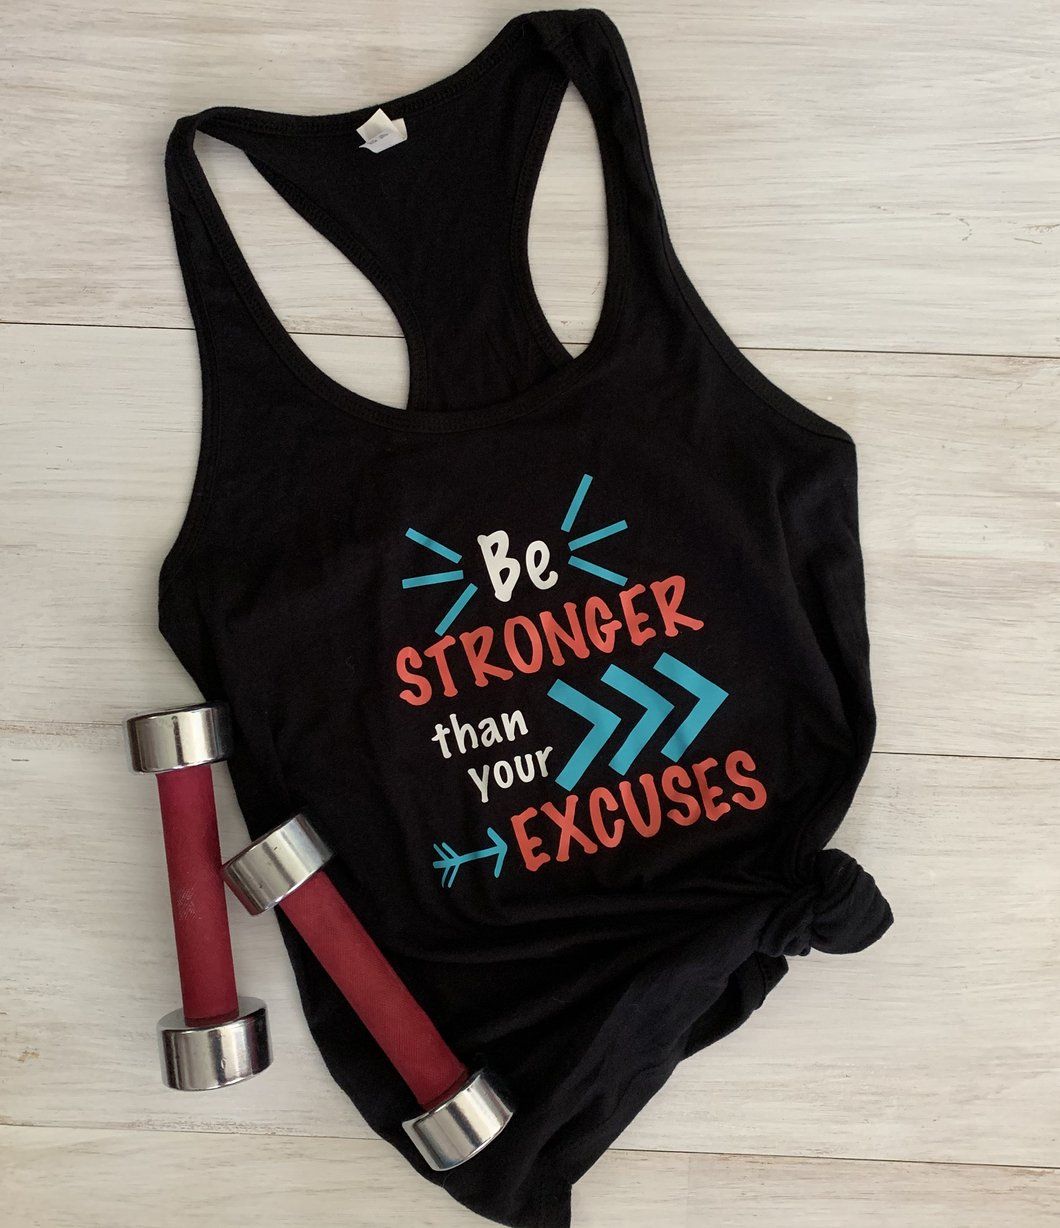 Be stronger than your excuses workout shirt | Fitness apparel